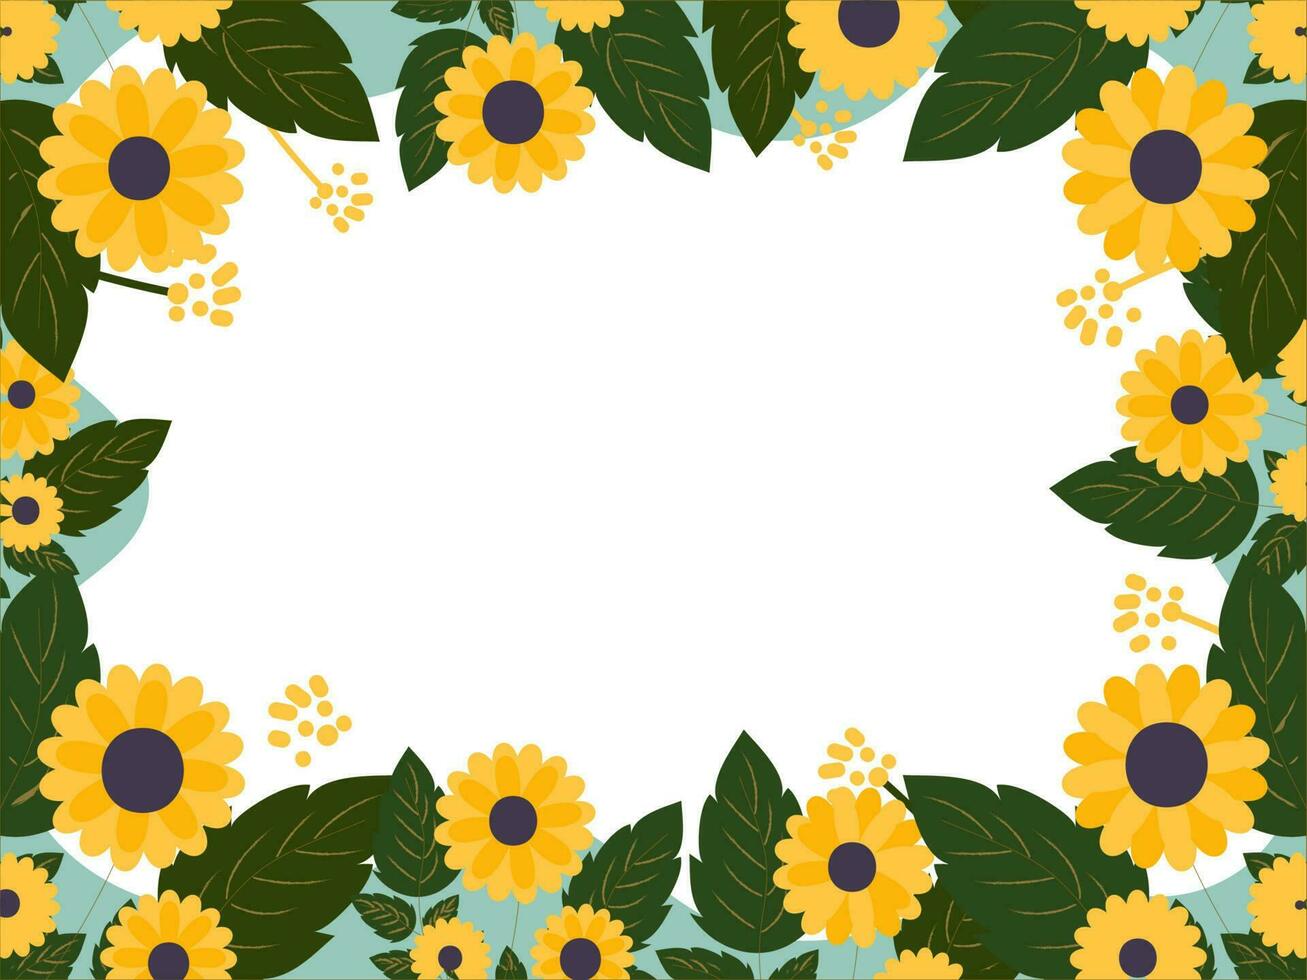 Yellow Flowers With Green Leaves Decorated On White Background And Given Space For Text. vector